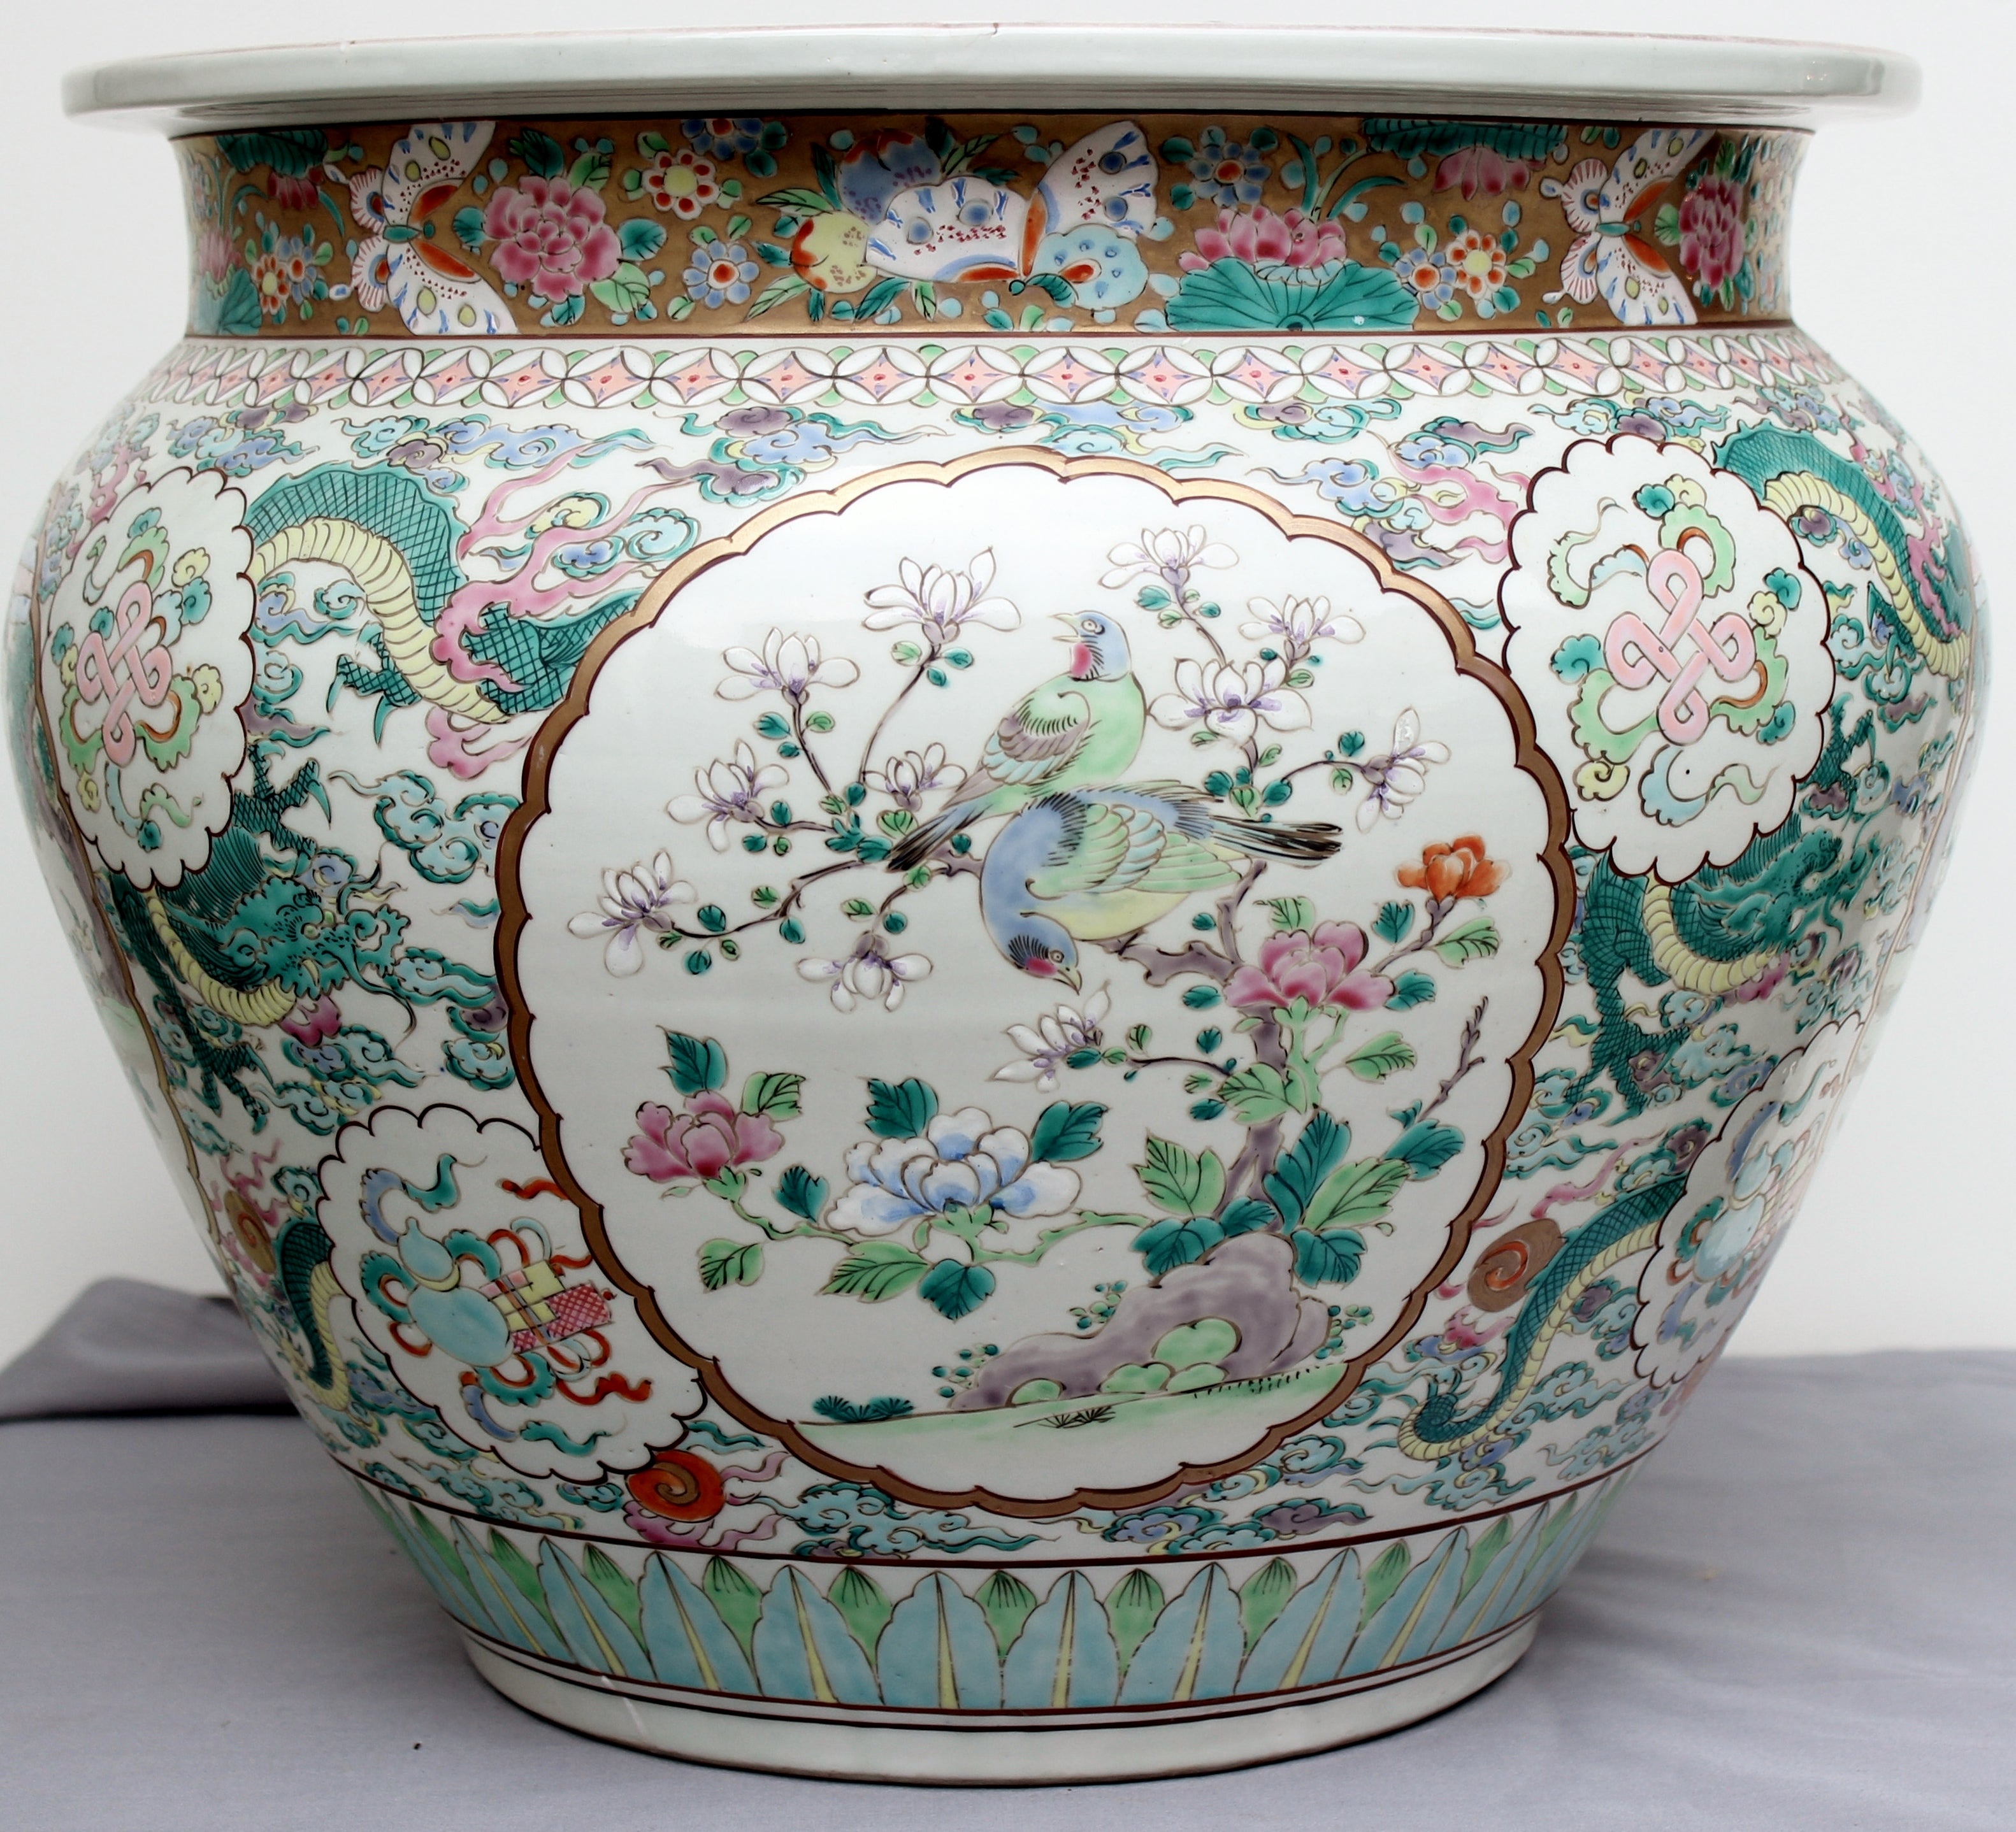 Antique Chinese Famille Rose Fish bowl or Jardiniere